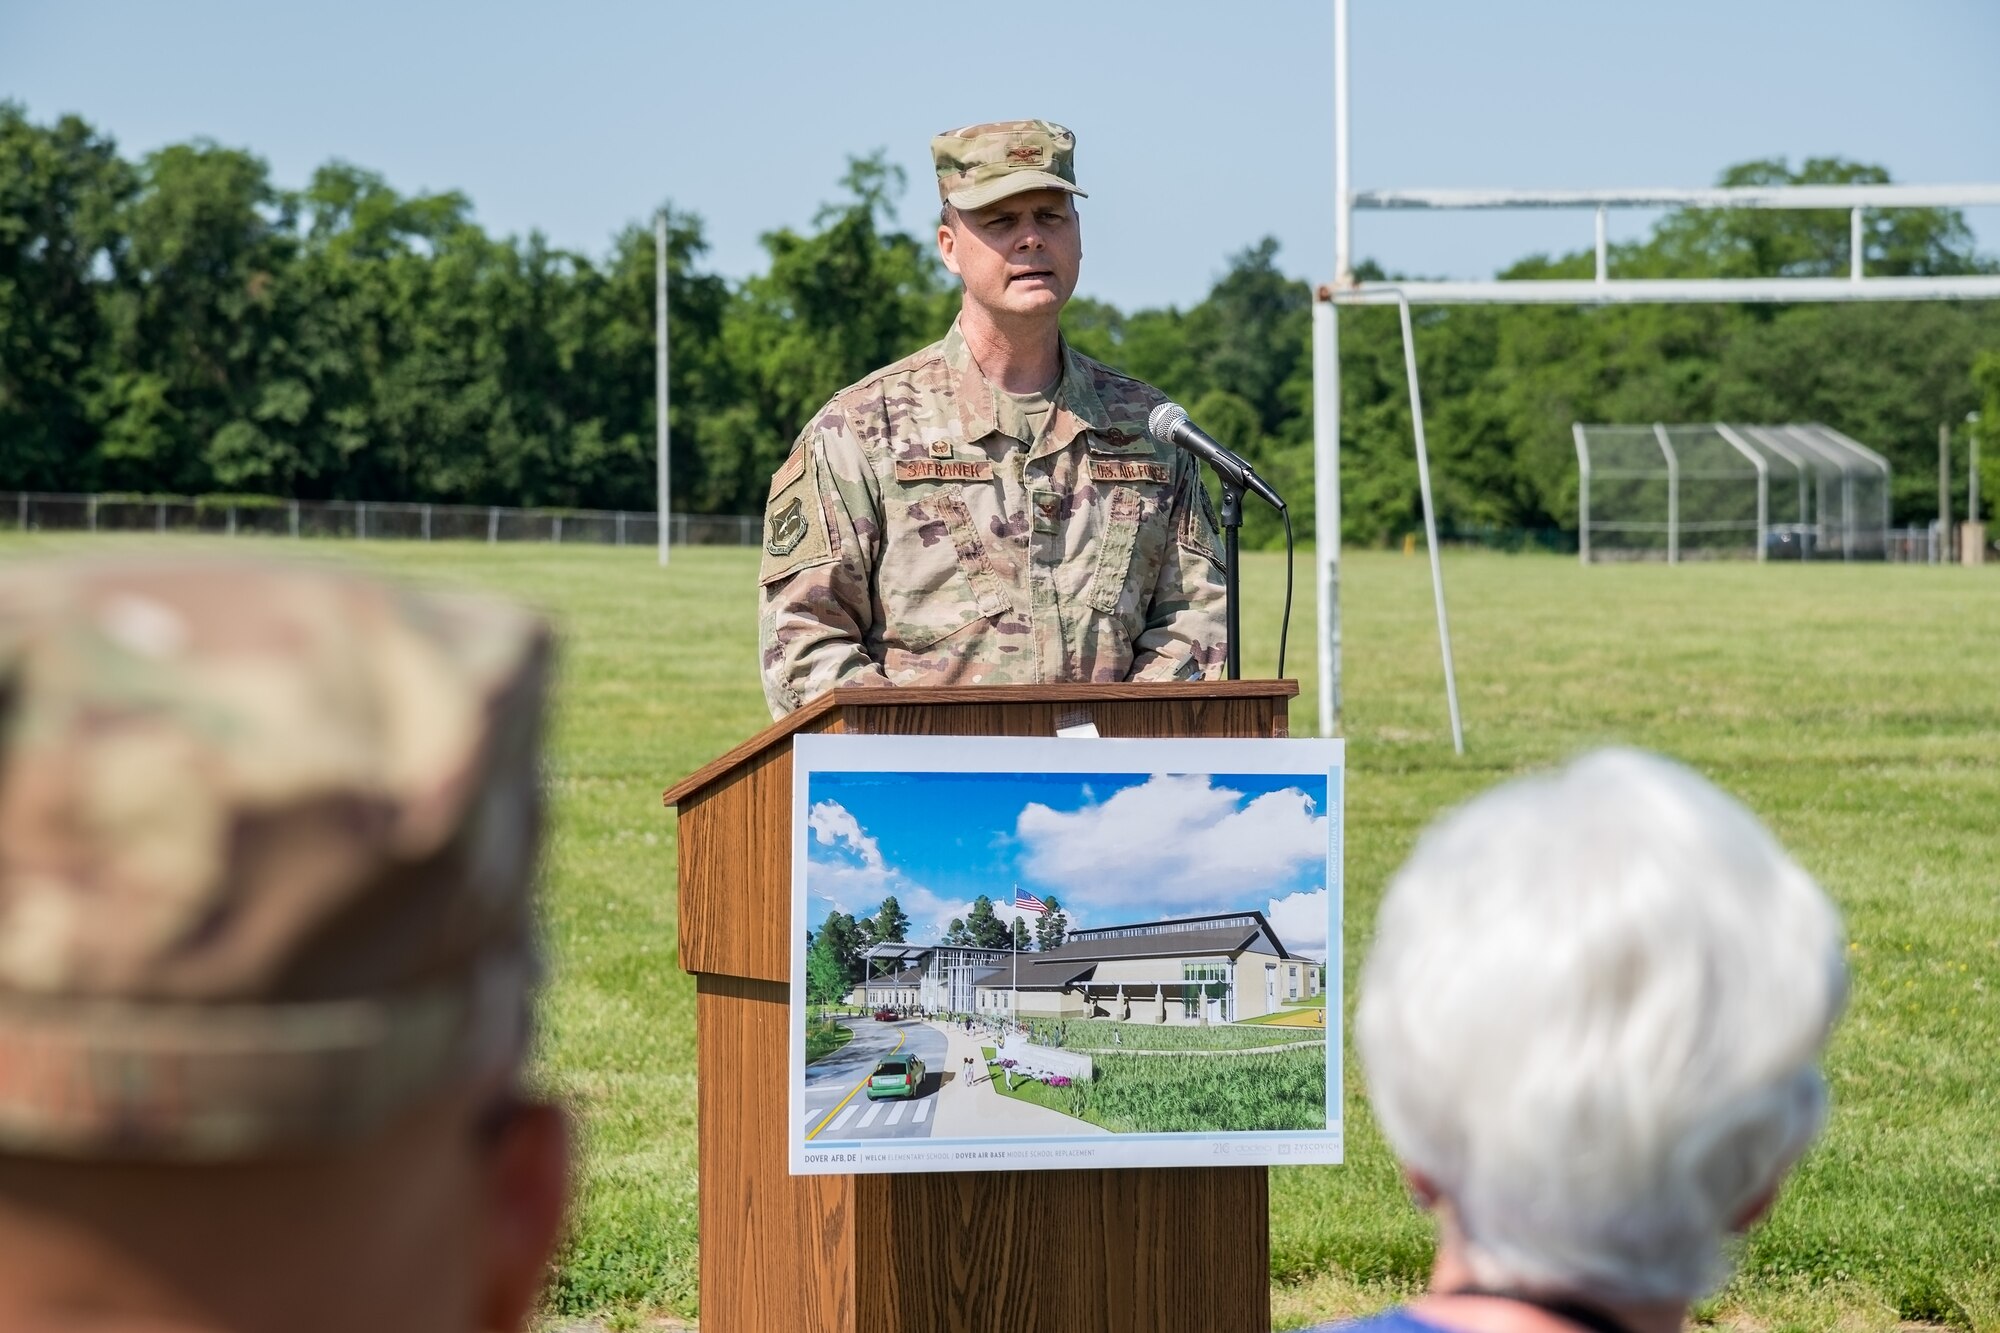 Col. Joel Safranek, 436th Airlift Wing commander, speaks to attendees at the groundbreaking ceremony for the new Welch Elementary School/Dover Air Base Middle School June 3, 2019, in the family housing area at Dover Air Force Base, Del. The $48 million project federally funded by the Department of Defense Education Activity will be built at the football field across the street form the Youth Center and adjacent to the existing elementary and middle schools. Scheduled to open at the beginning of the 2021 school year, the new building will have more than 105,000 square feet in learning space for approximately 490 students. (U.S. Air Force photo by Roland Balik)